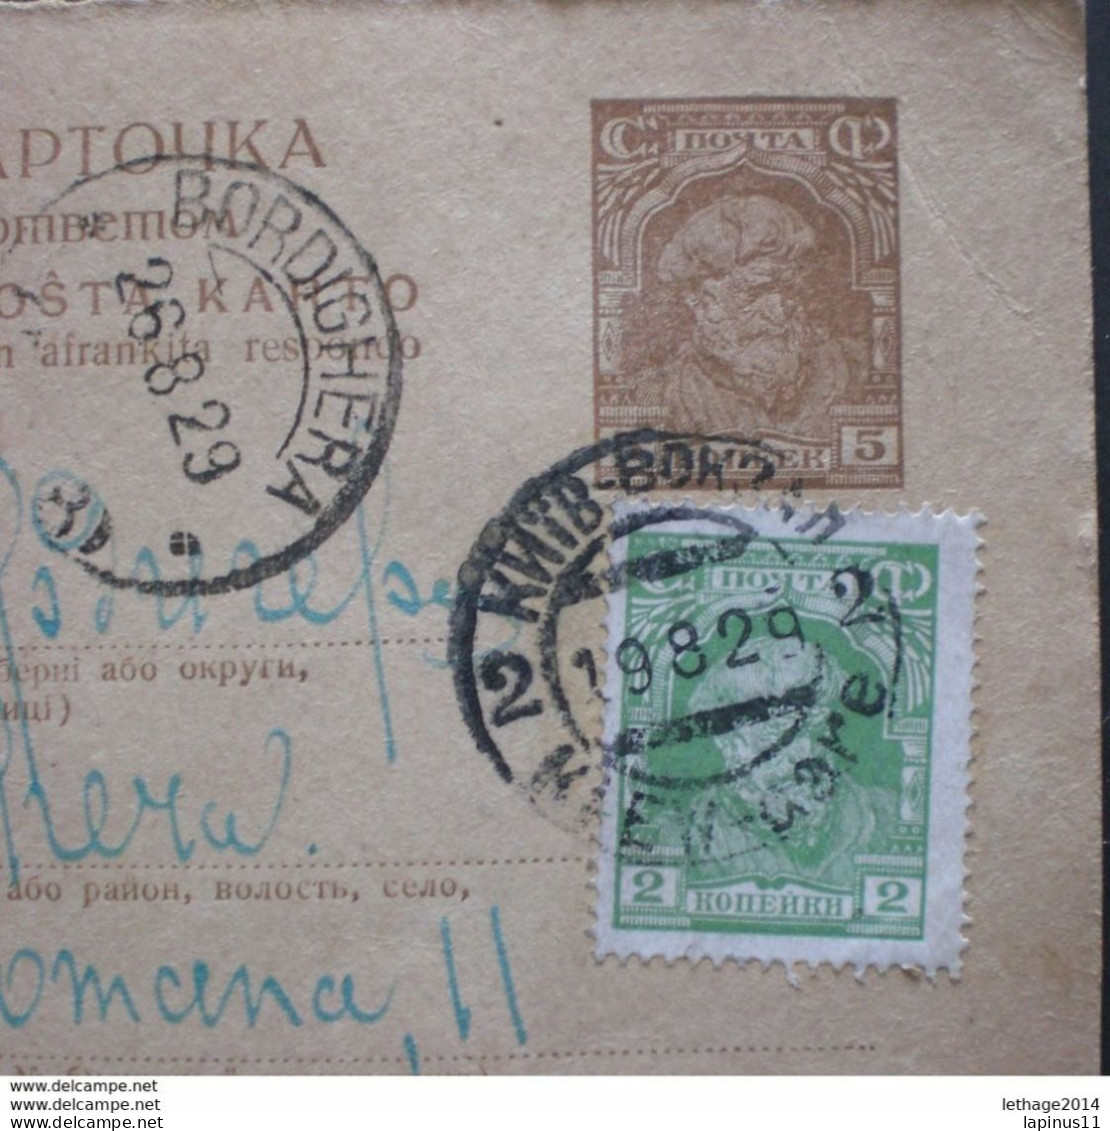 RUSSIA RUSSIE РОССИЯ STAMPS POST CARD 1929 TRICENTENAIRE DE L AVENEMENT DE ROMANOW RUSSLAND TO ITALY RRR RIF. TAGG (161) - Covers & Documents